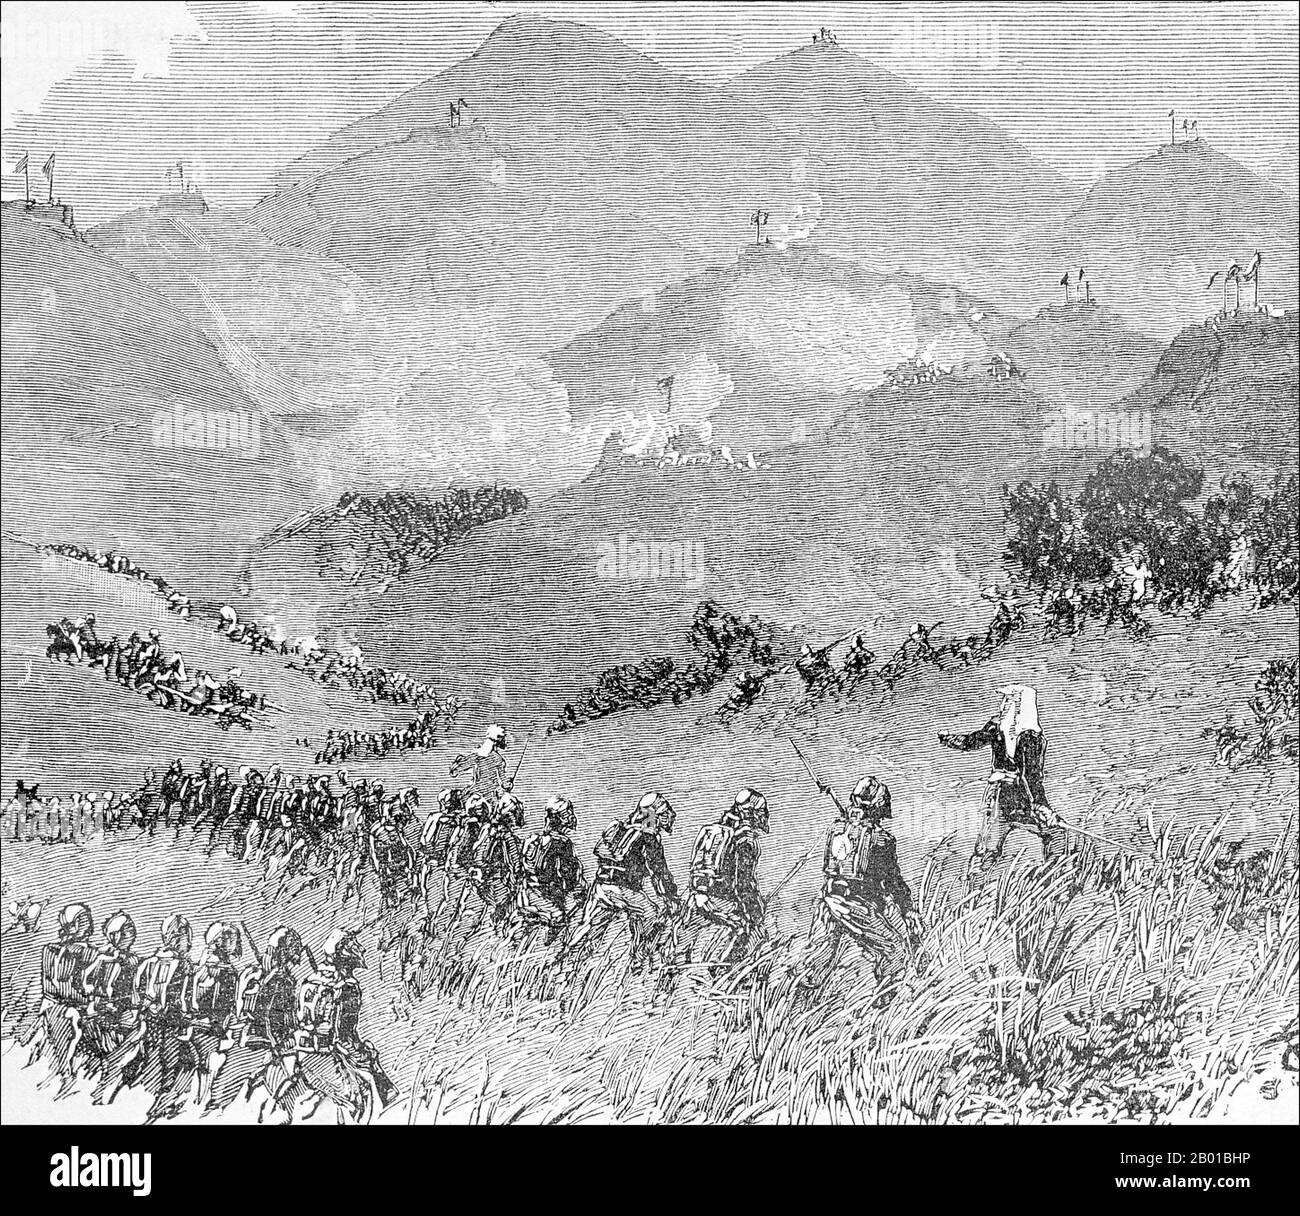 Vietnam/France: French troops advance on Chinese hill positions during the Battle of Bac Vie, 12 February 1885. Engraving, 1887.  The Tonkin Campaign (French: Campagne du Tonkin) was an armed conflict fought between June 1883 and April 1886 by the French against, variously, the Vietnamese, Liu Yongfu's Black Flag Army and the Chinese Guangxi and Yunnan armies to occupy Tonkin (northern Vietnam) and entrench a French protectorate there. Stock Photo